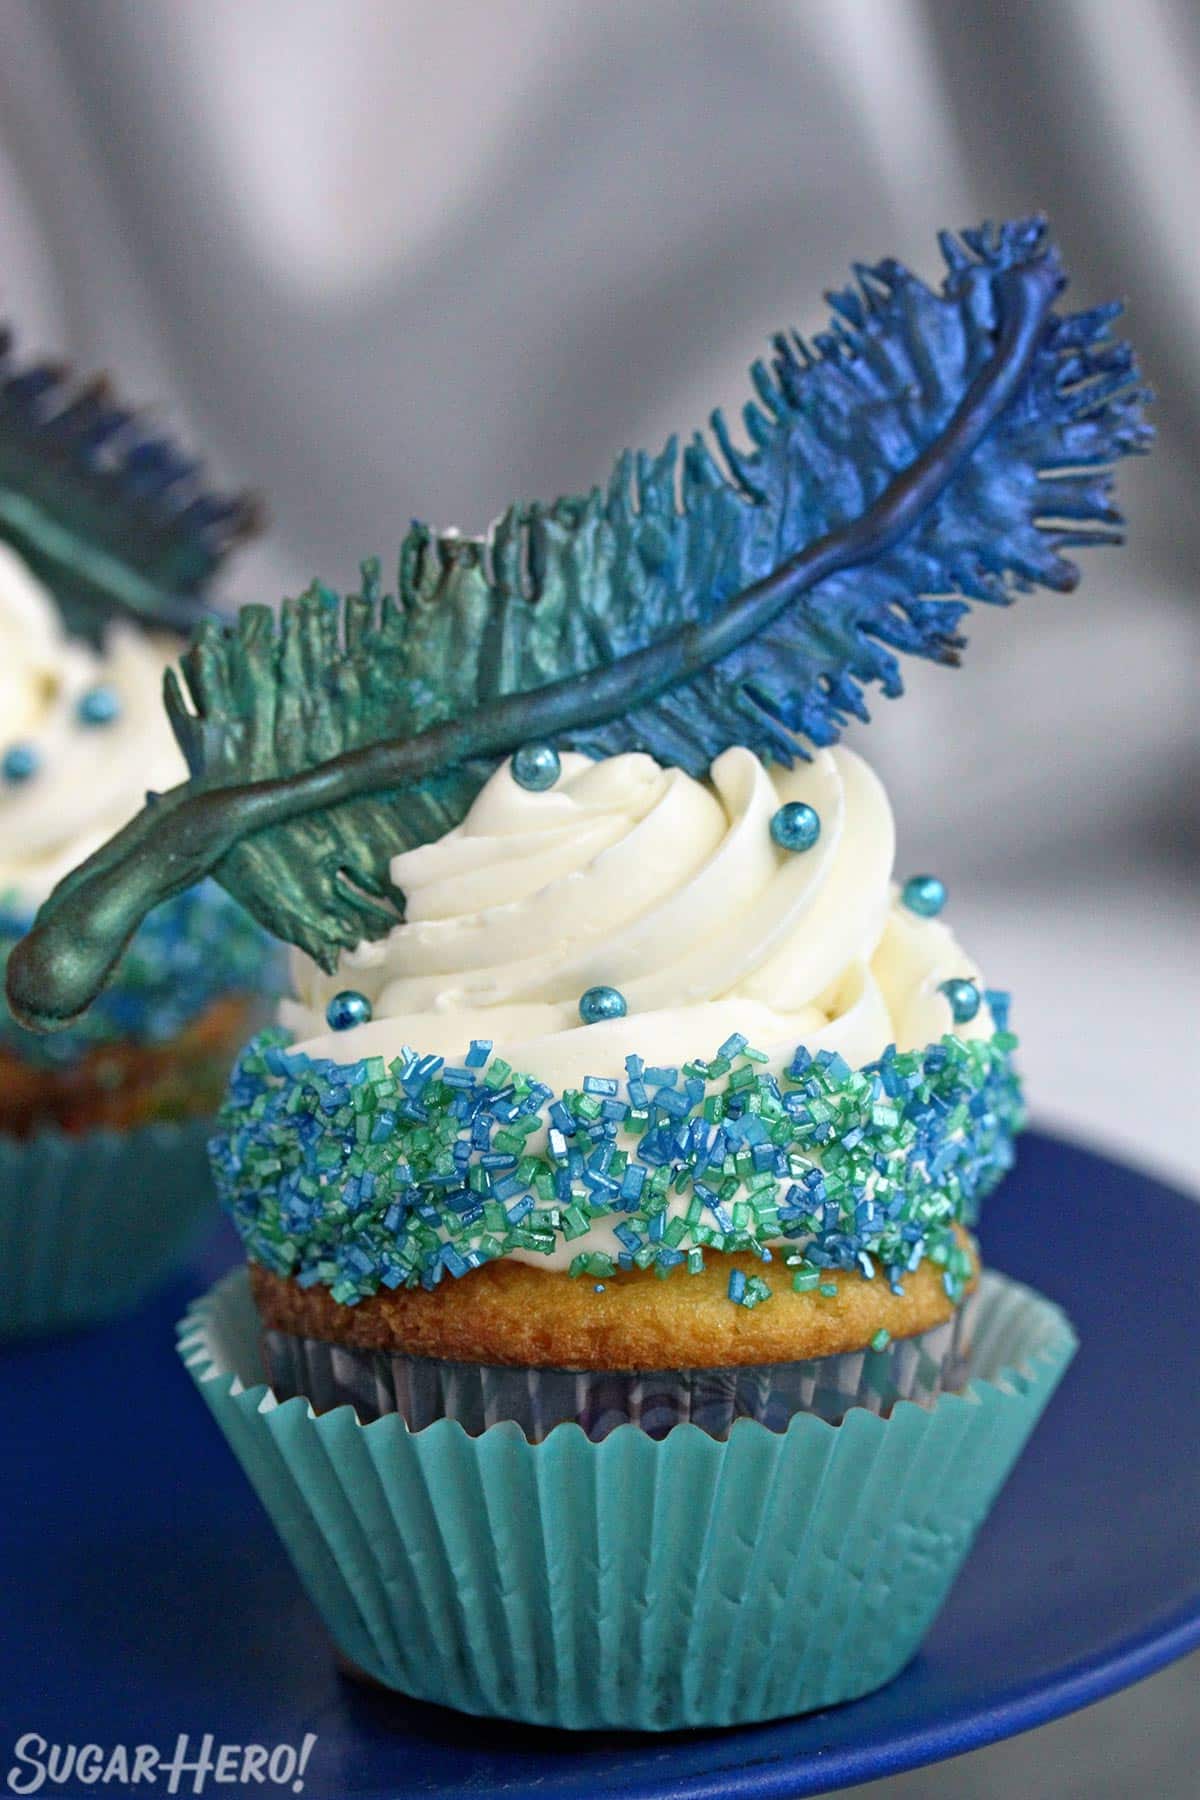 Cupcake on a blue plate with a blue-green chocolate feather on top.